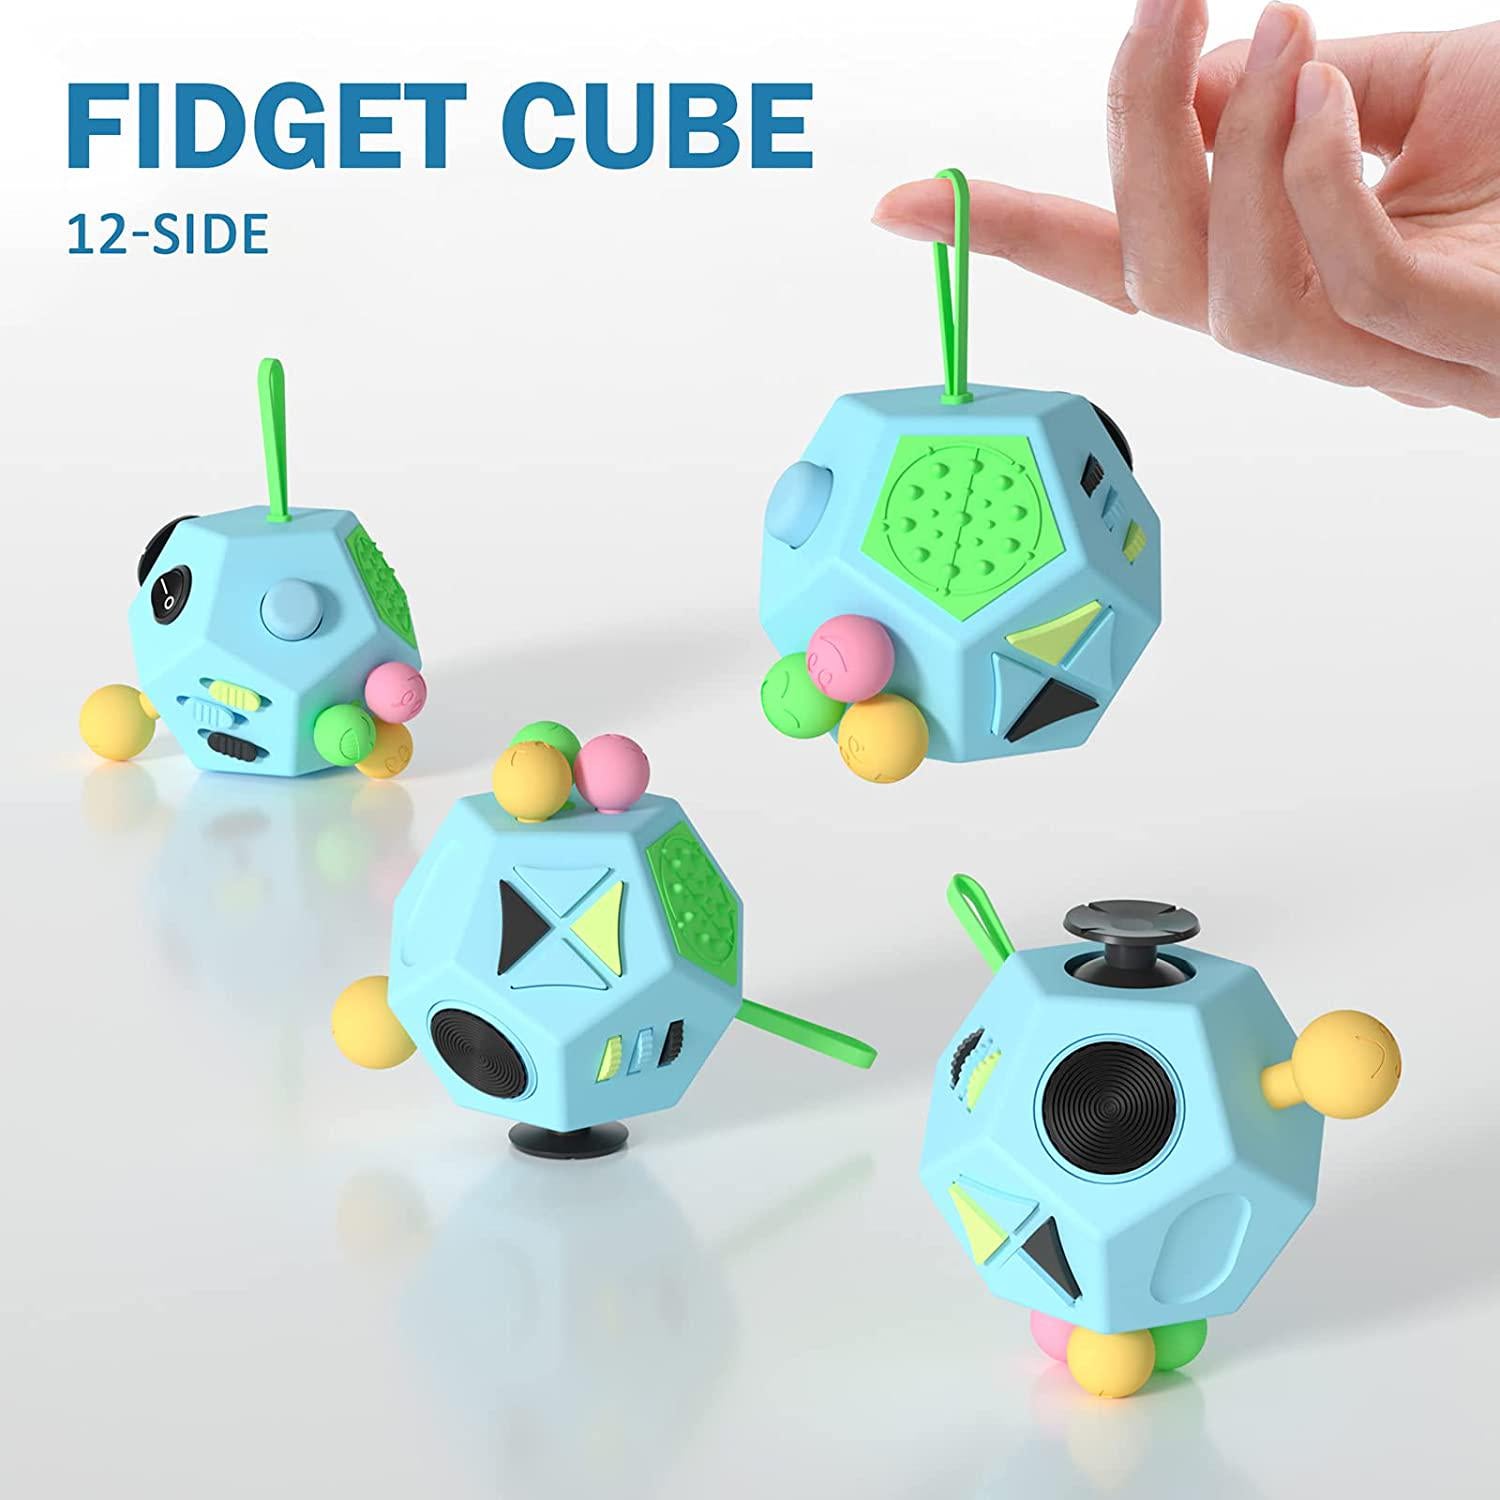 Minilopa, Fidget Dodecagon 12-Side Fidget Cube Relieves Stress and Anxiety Anti Depression Cube for Children and Adults with ADHD ADD OCD Autism (B3 Blue Sky)